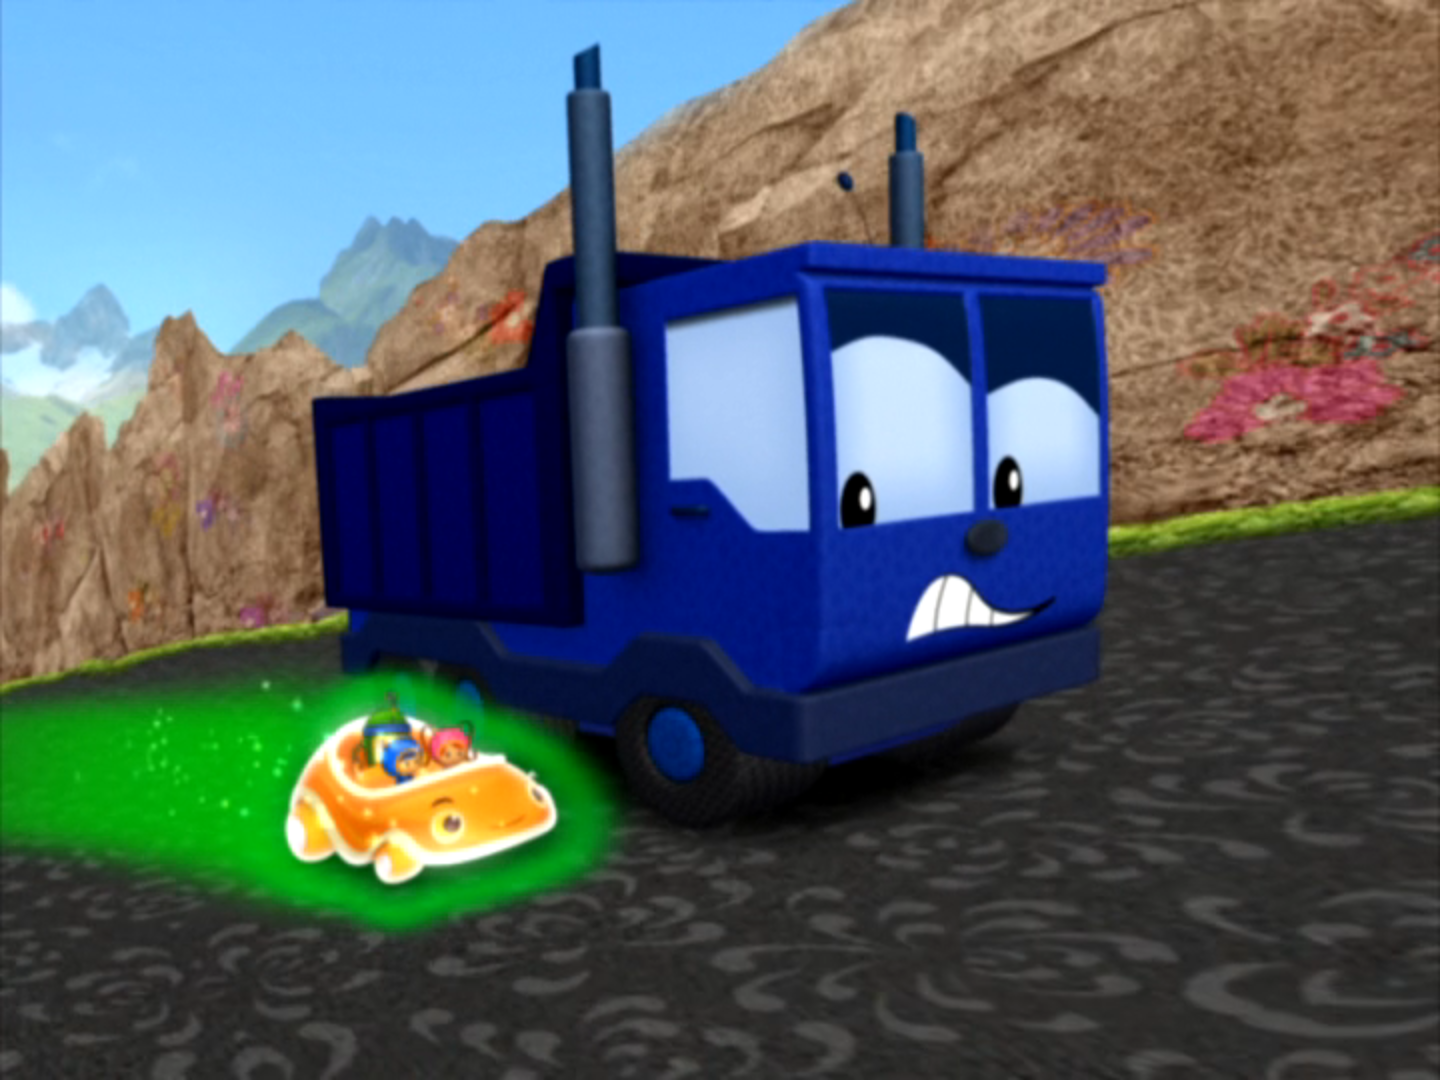 https://static.wikia.nocookie.net/teamumizoomi/images/e/e6/Shape_race_episode.png/revision/latest?cb=20231029071038